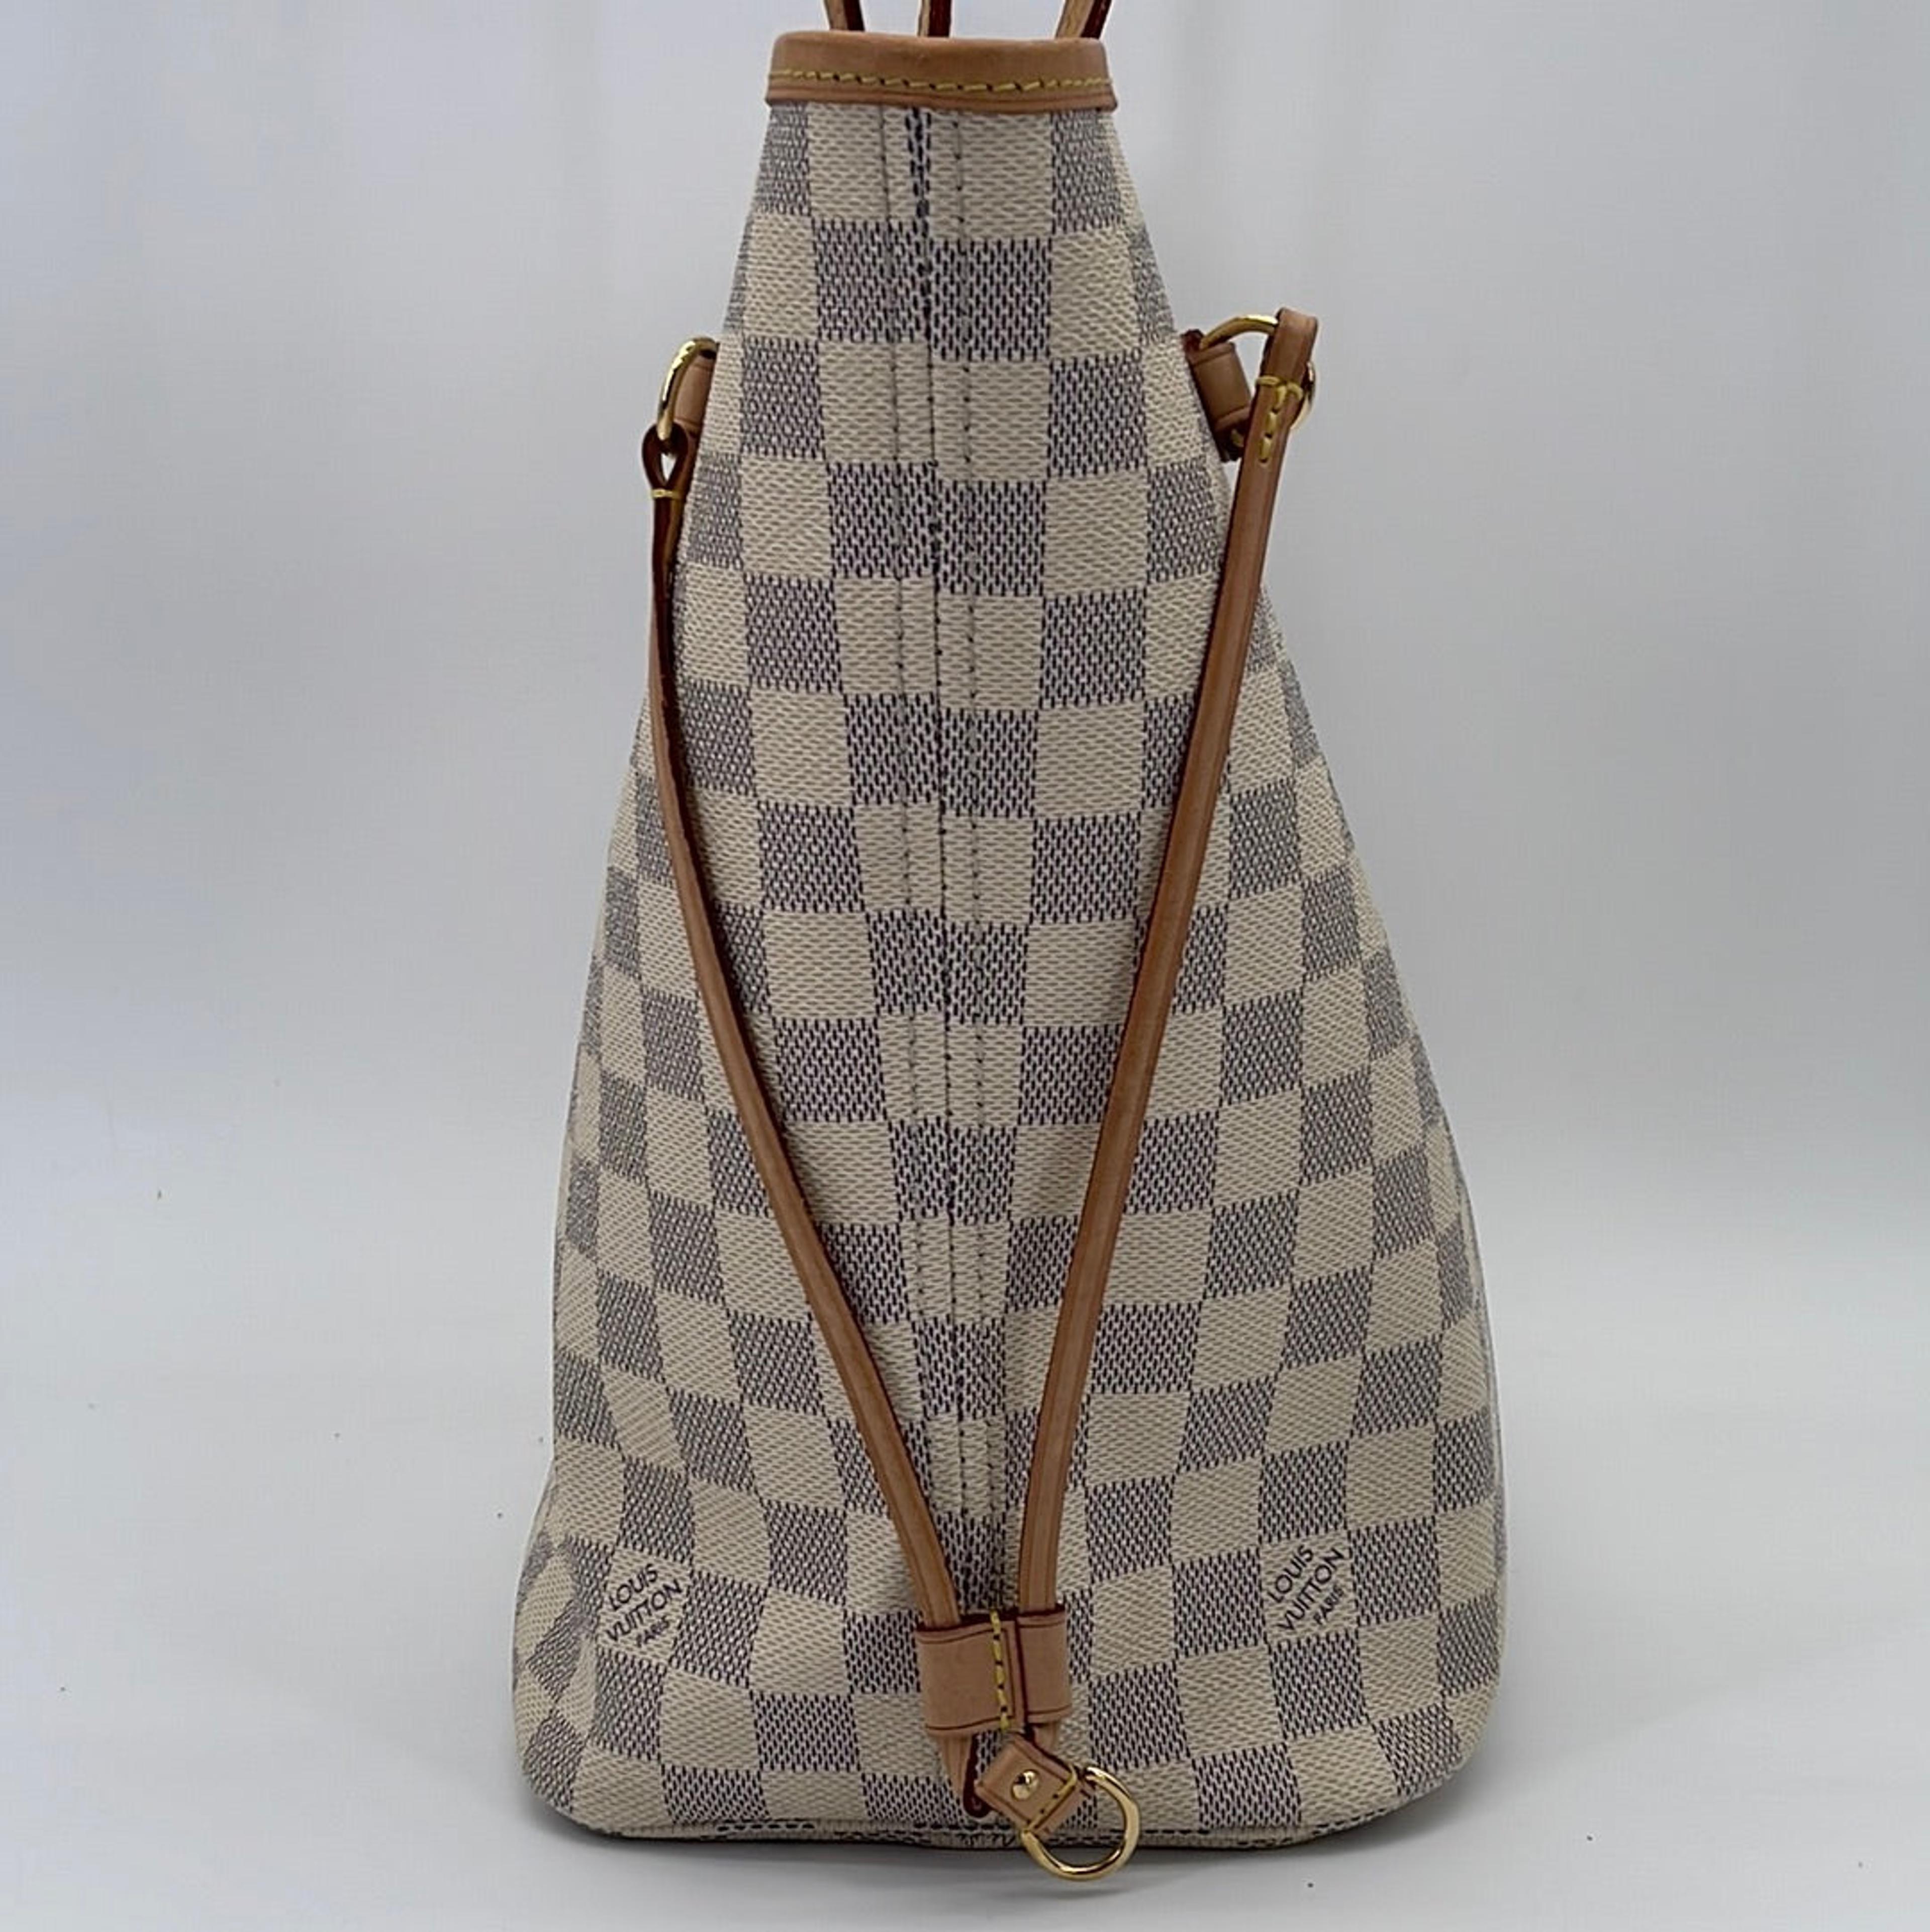 Sold at Auction: Damier Azur 'Neverfull MM' Louis Vuitton Tote Bag